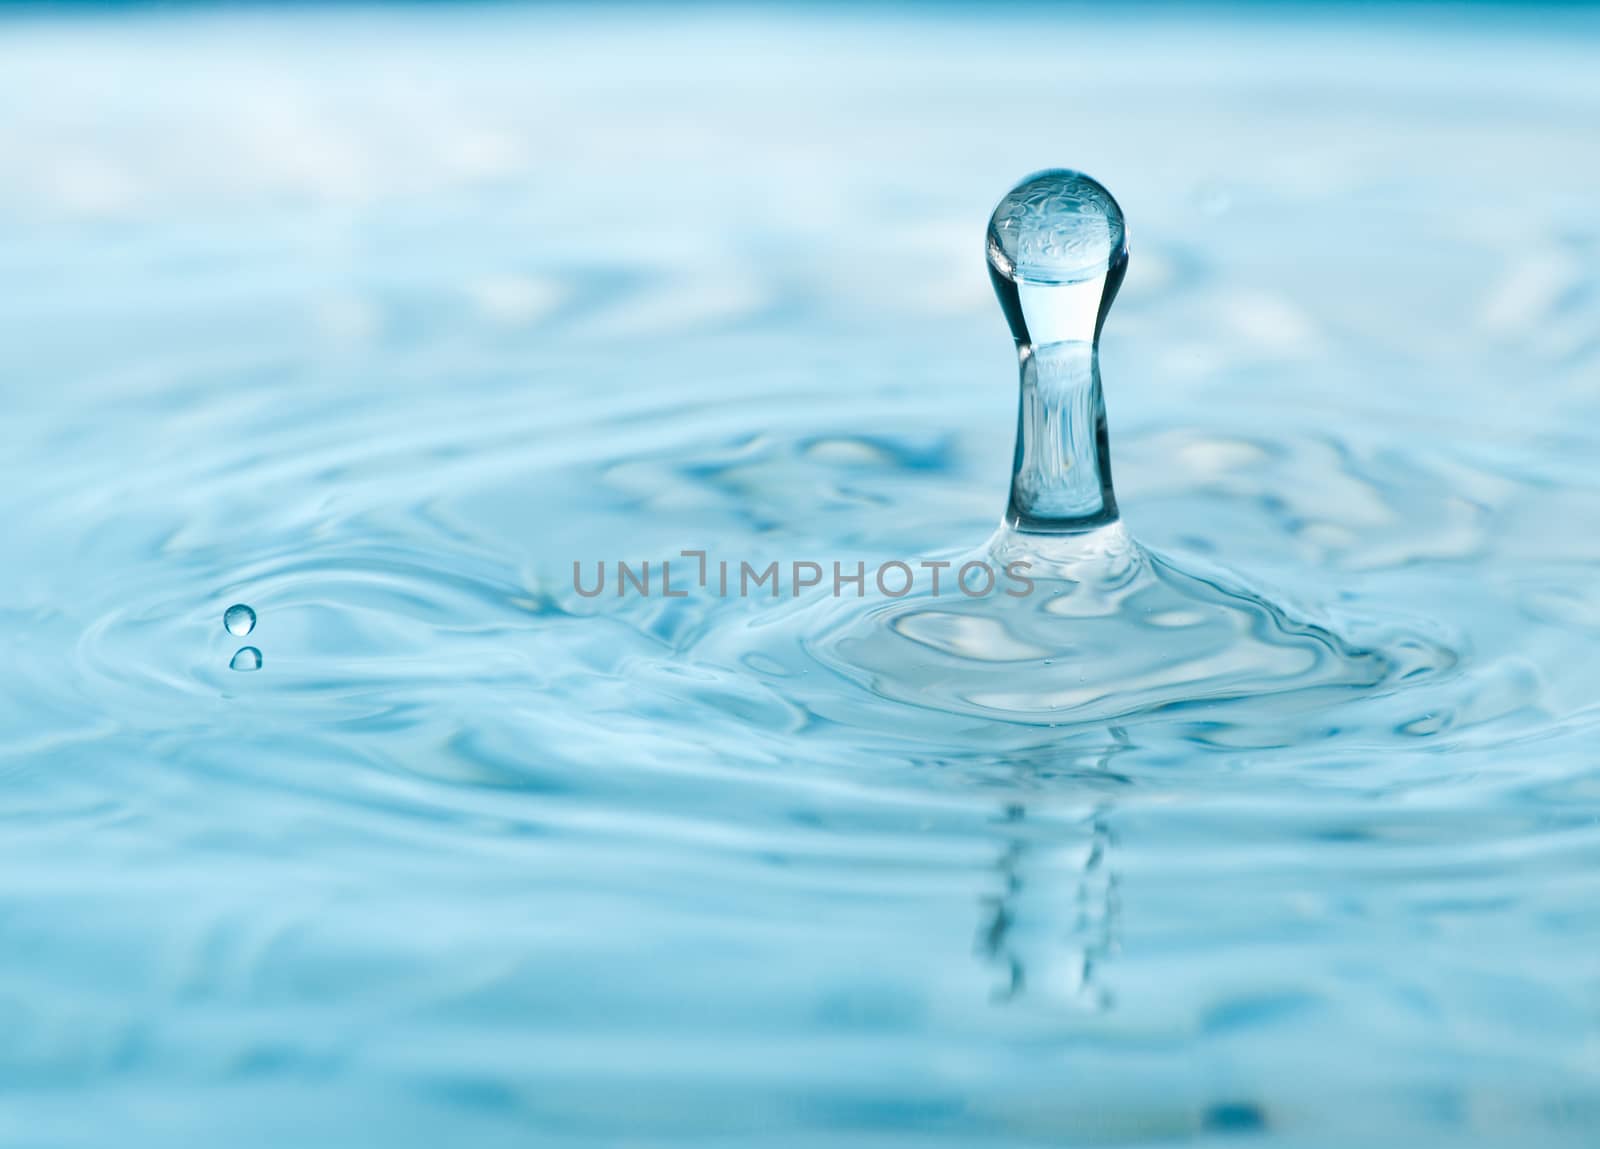 A cool water drop frozen in time